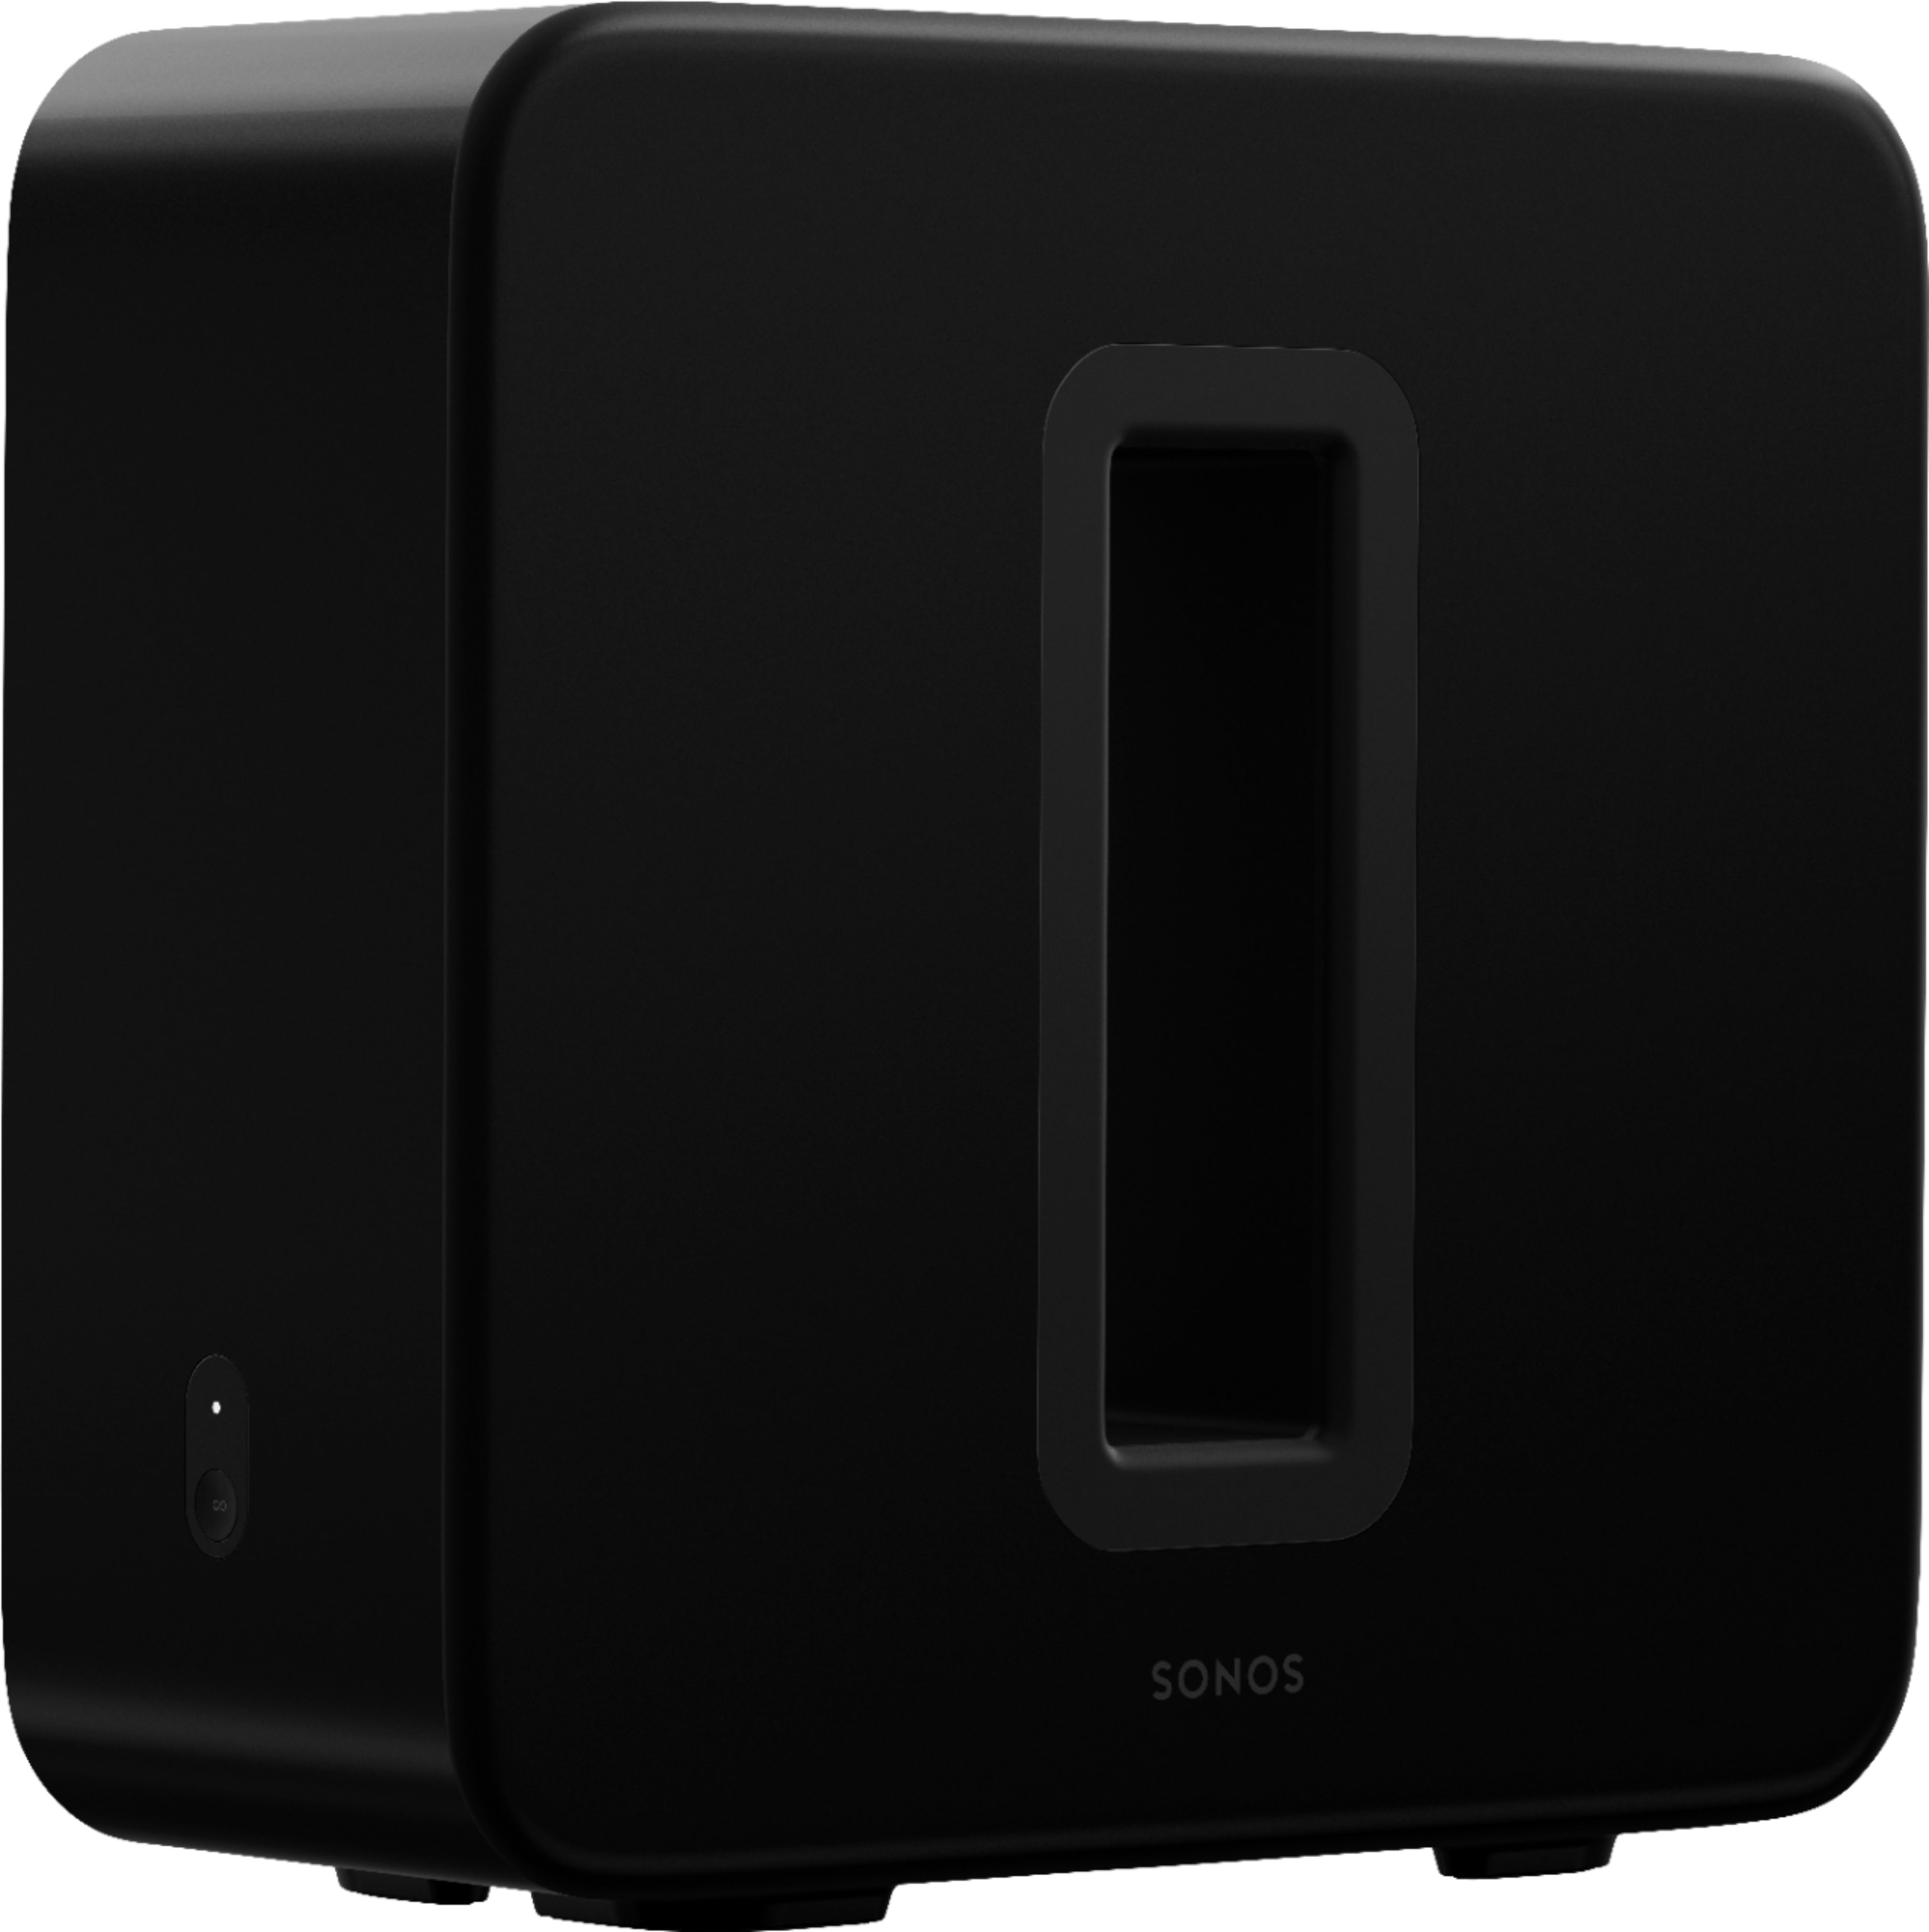 Angle View: Sonos - Geek Squad Certified Refurbished Sub (Gen 3) Wireless Subwoofer - Black